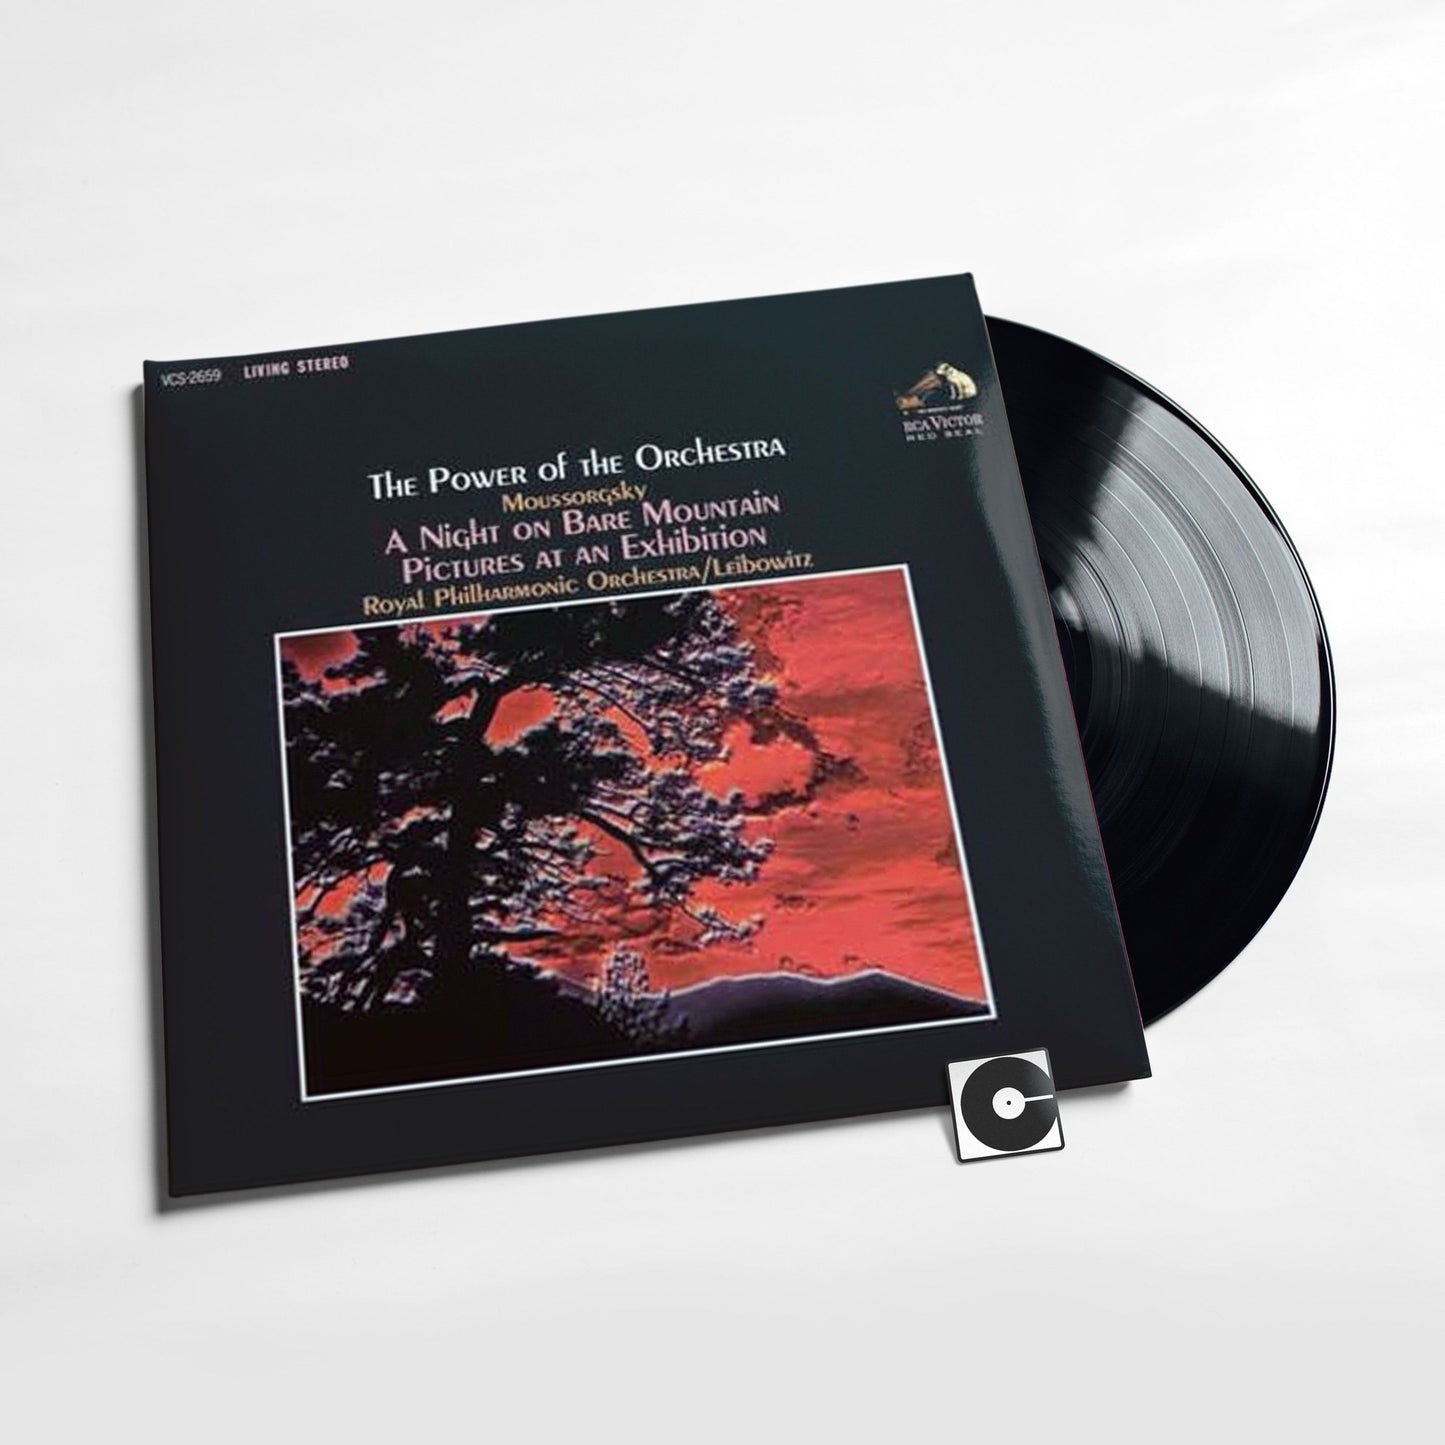 Moussorgsky - "The Power Of The Orchestra - Leibowitz" Analogue Productions